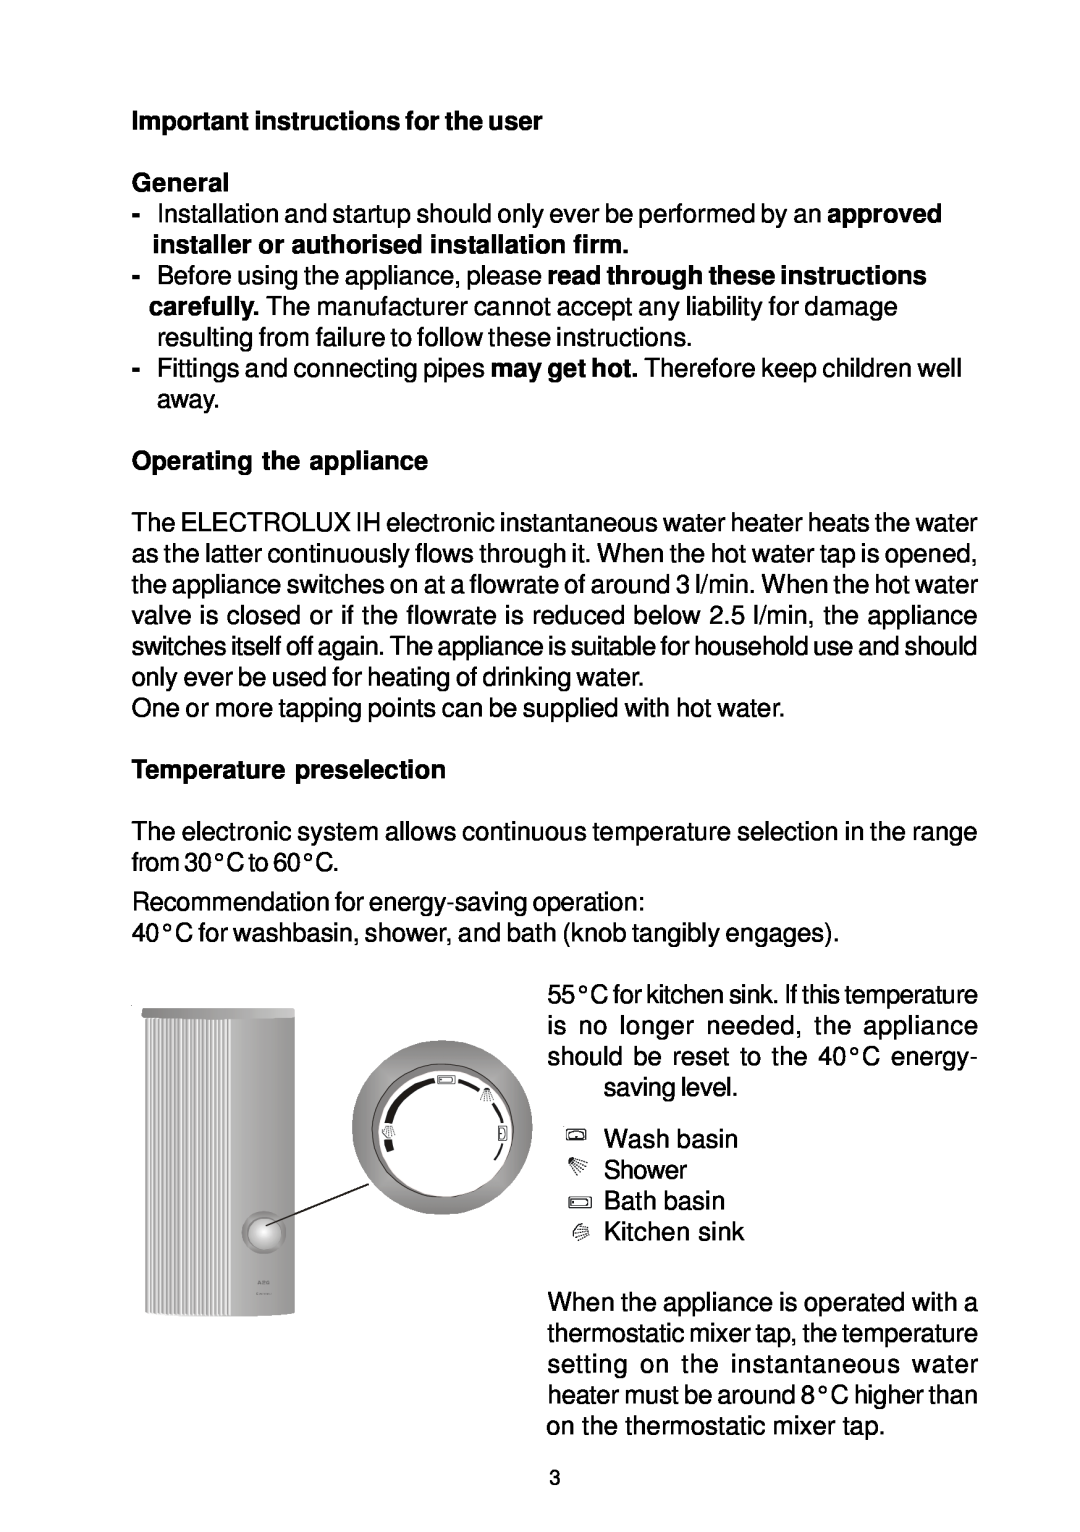 Electrolux IH24, IH 18, IH21 Important instructions for the user General, Operating the appliance, Temperature preselection 